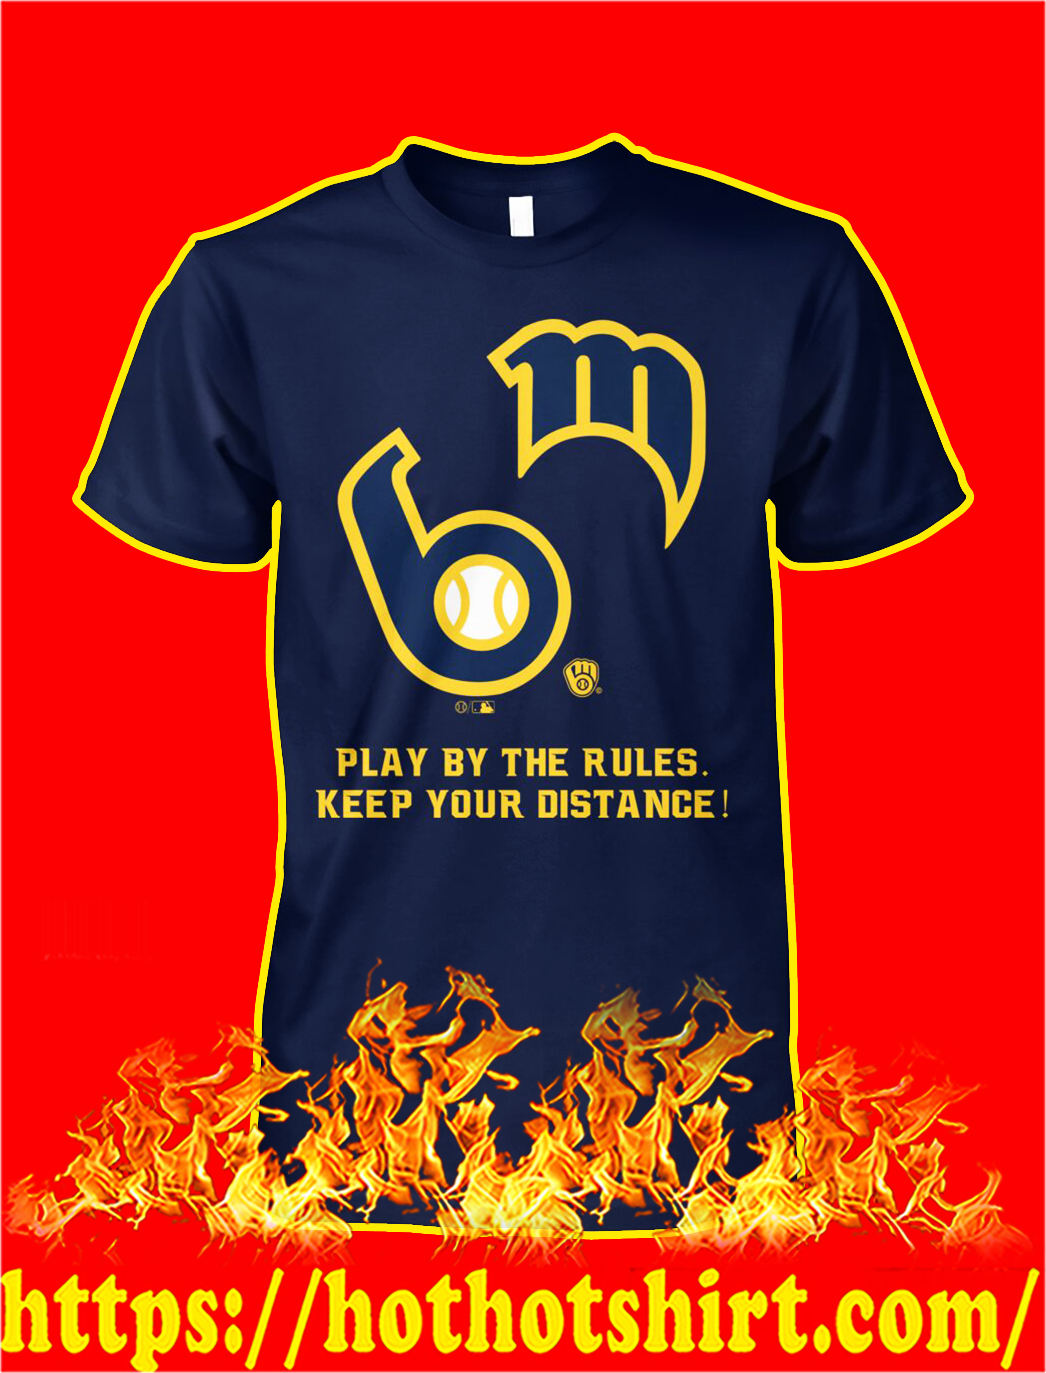 MLB play by the rules keep your distance shirt